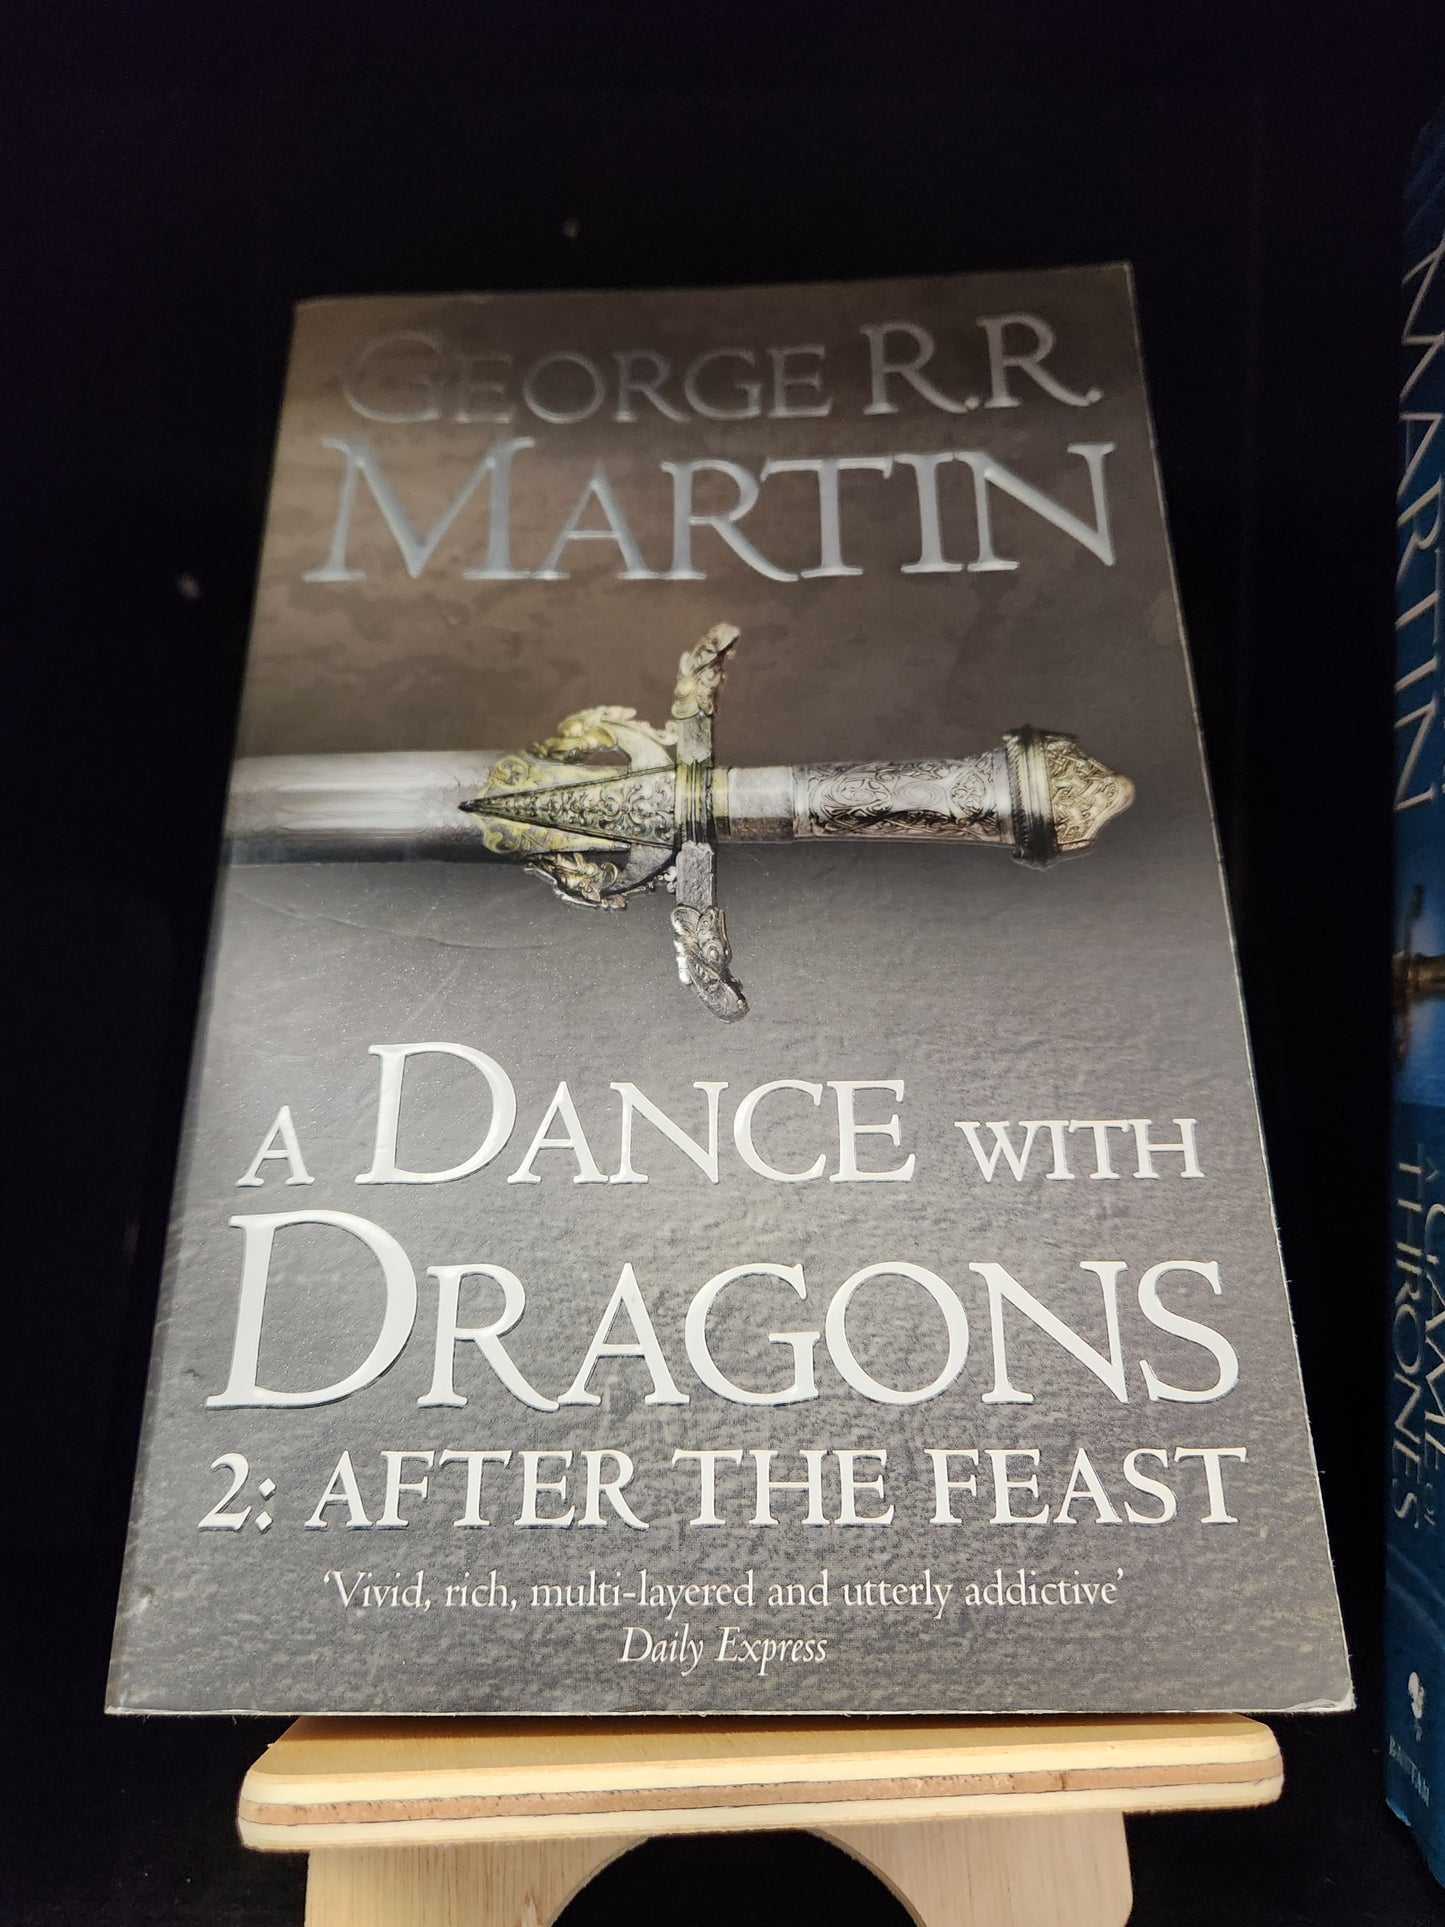 A Dance with Dragons 2: After the Feast, by George R. R. Martin